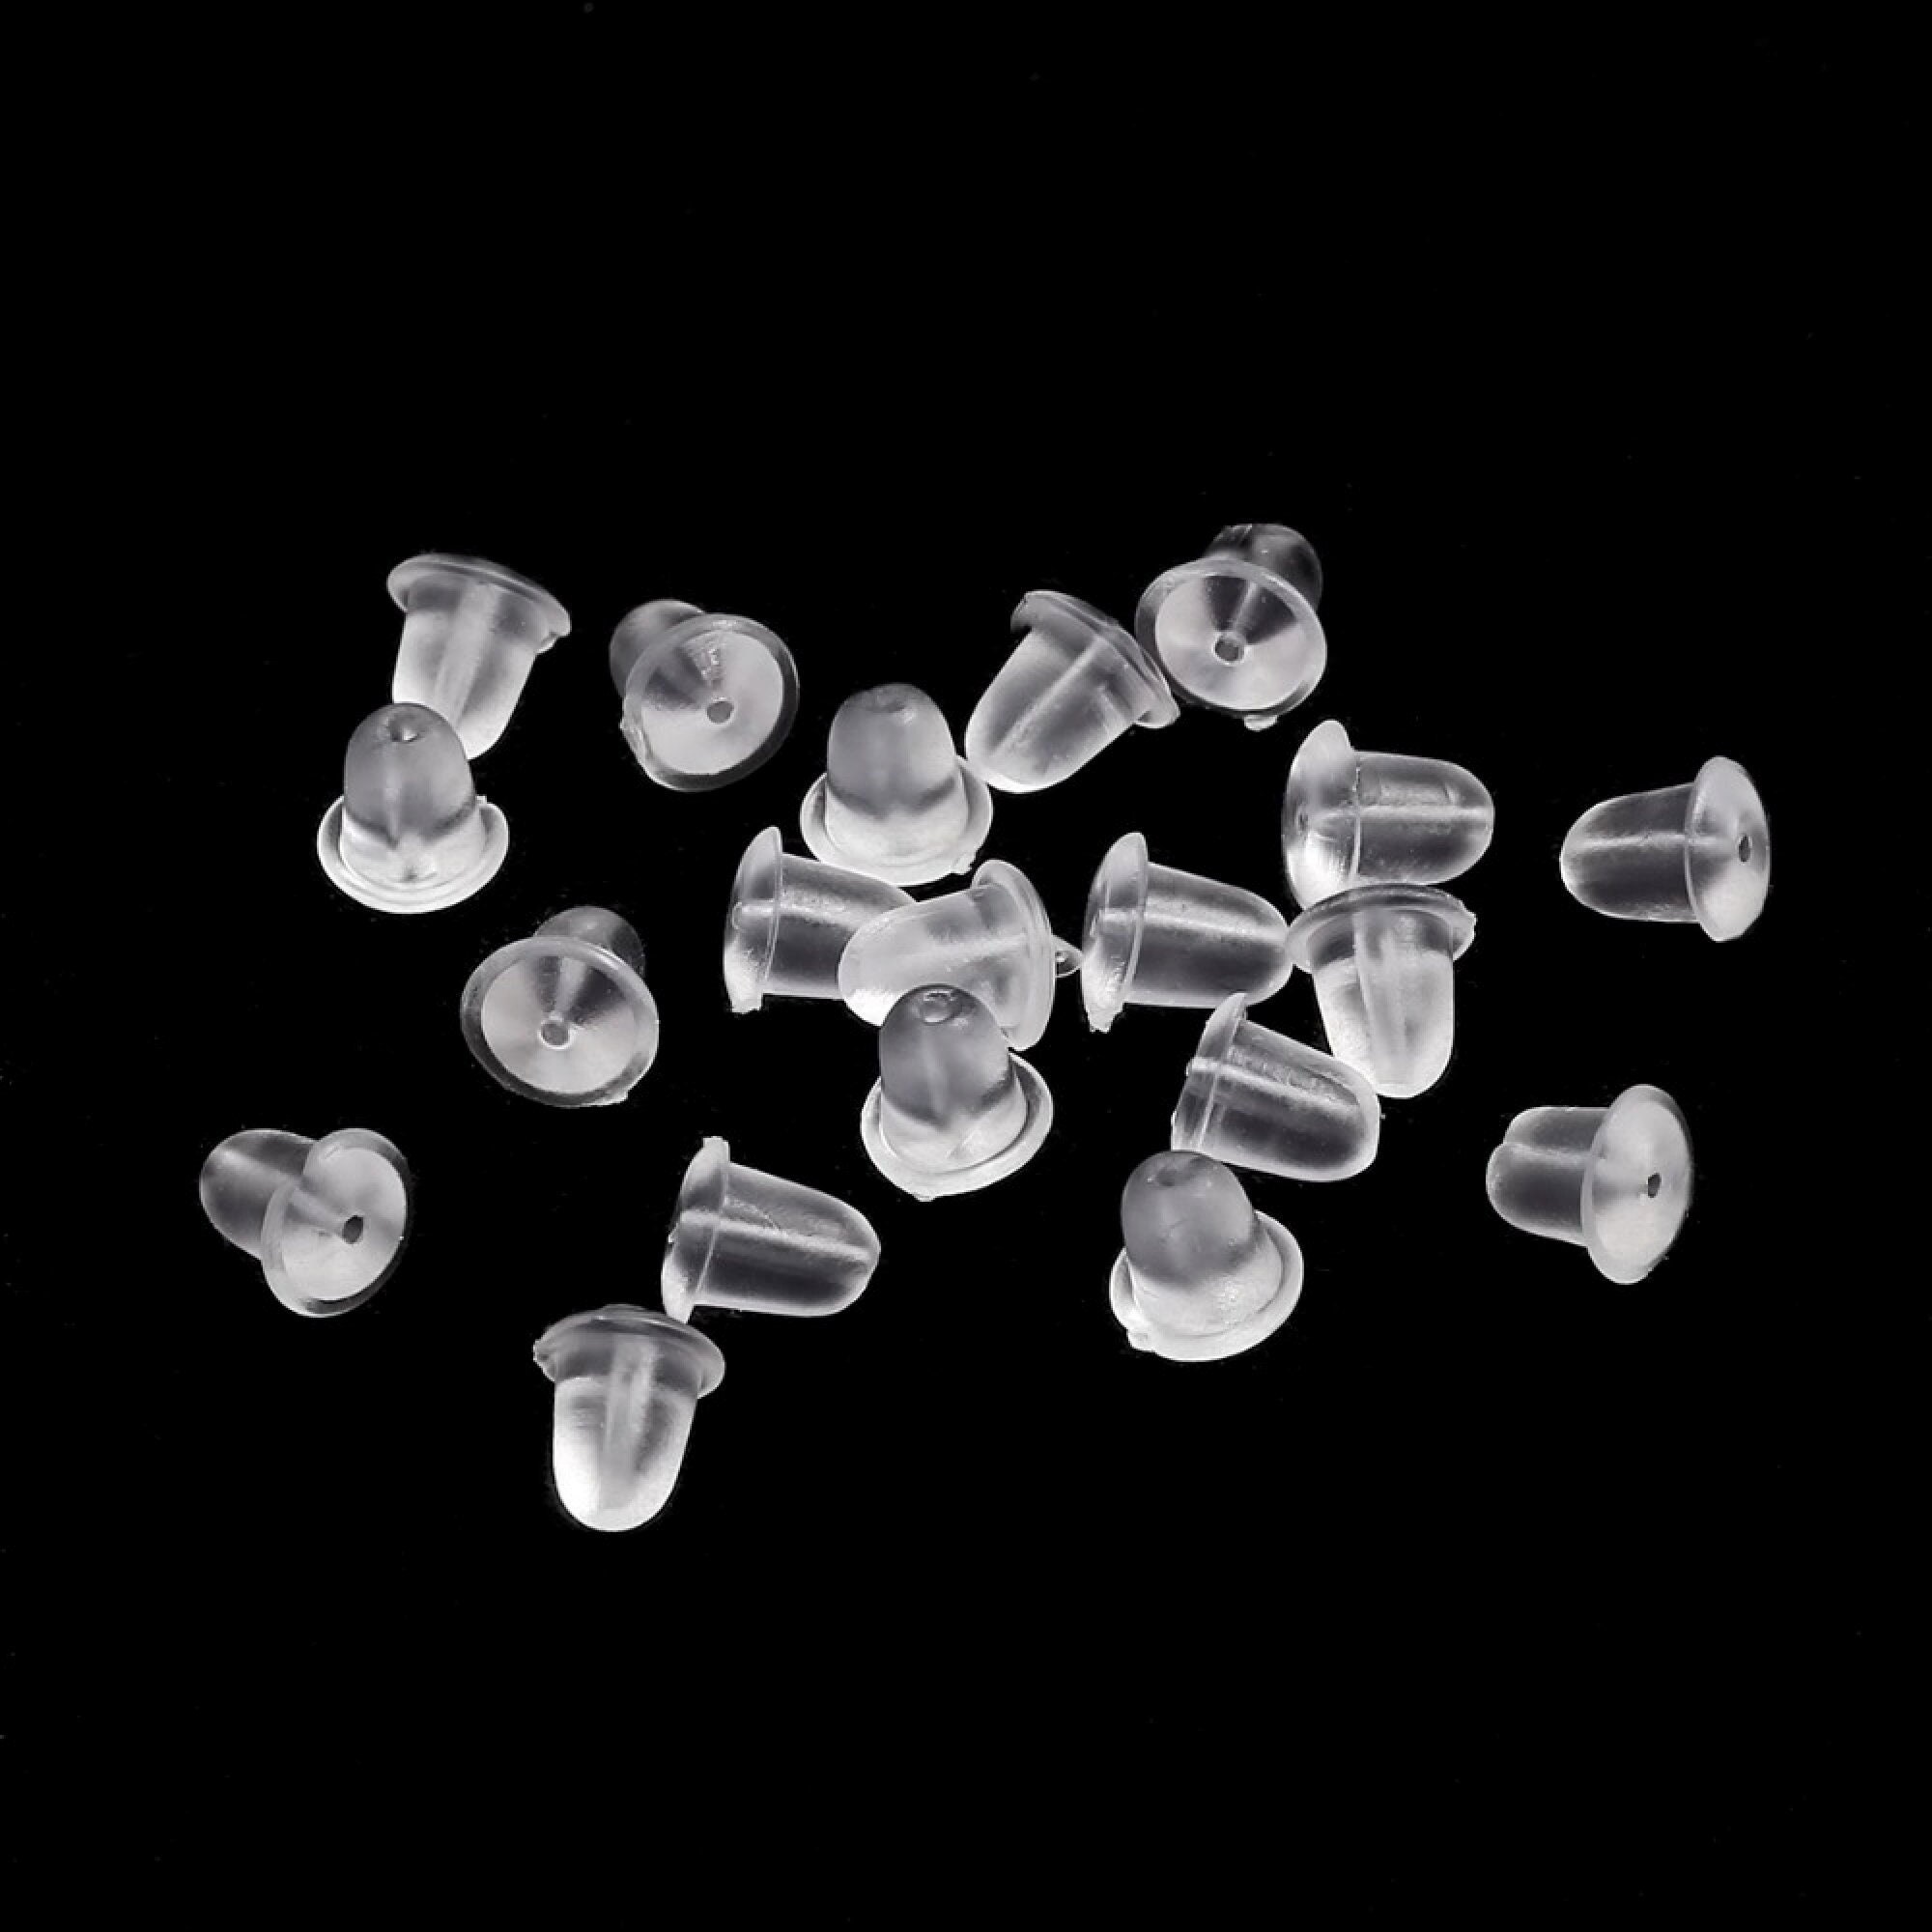 50pcs Soft Clear Silicone Earring Backs Safety Backings for Earrings 